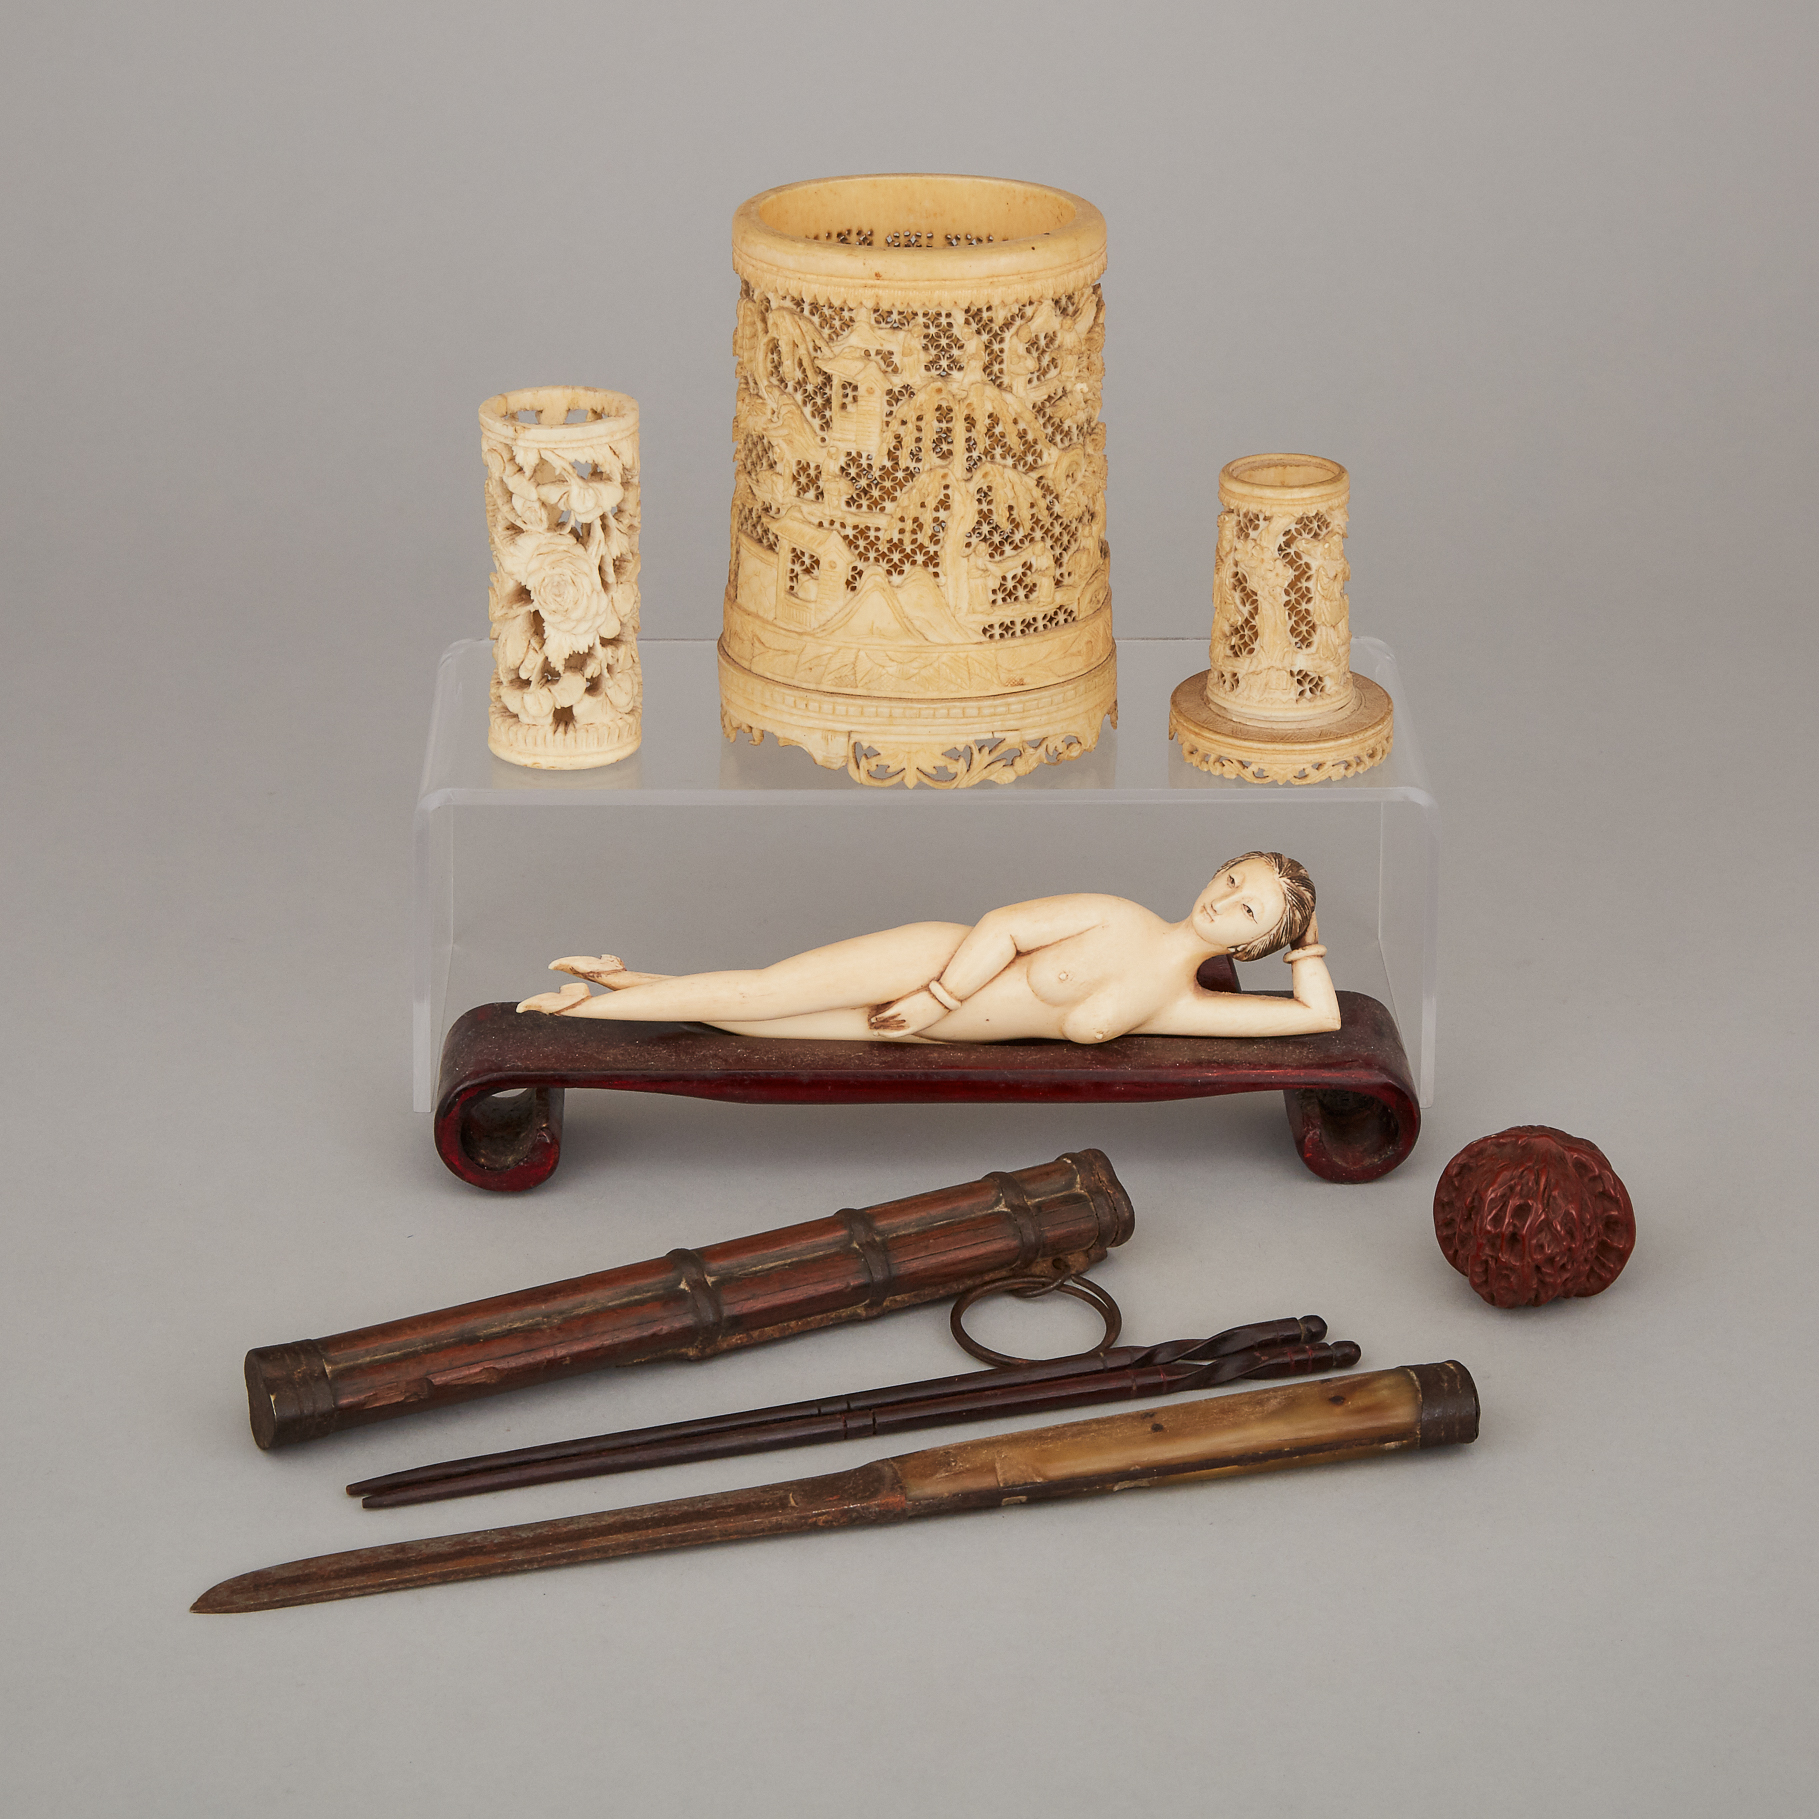 A Group of Six Chinese Ivory, Bamboo, and Nut Carved Items, Early 20th Century